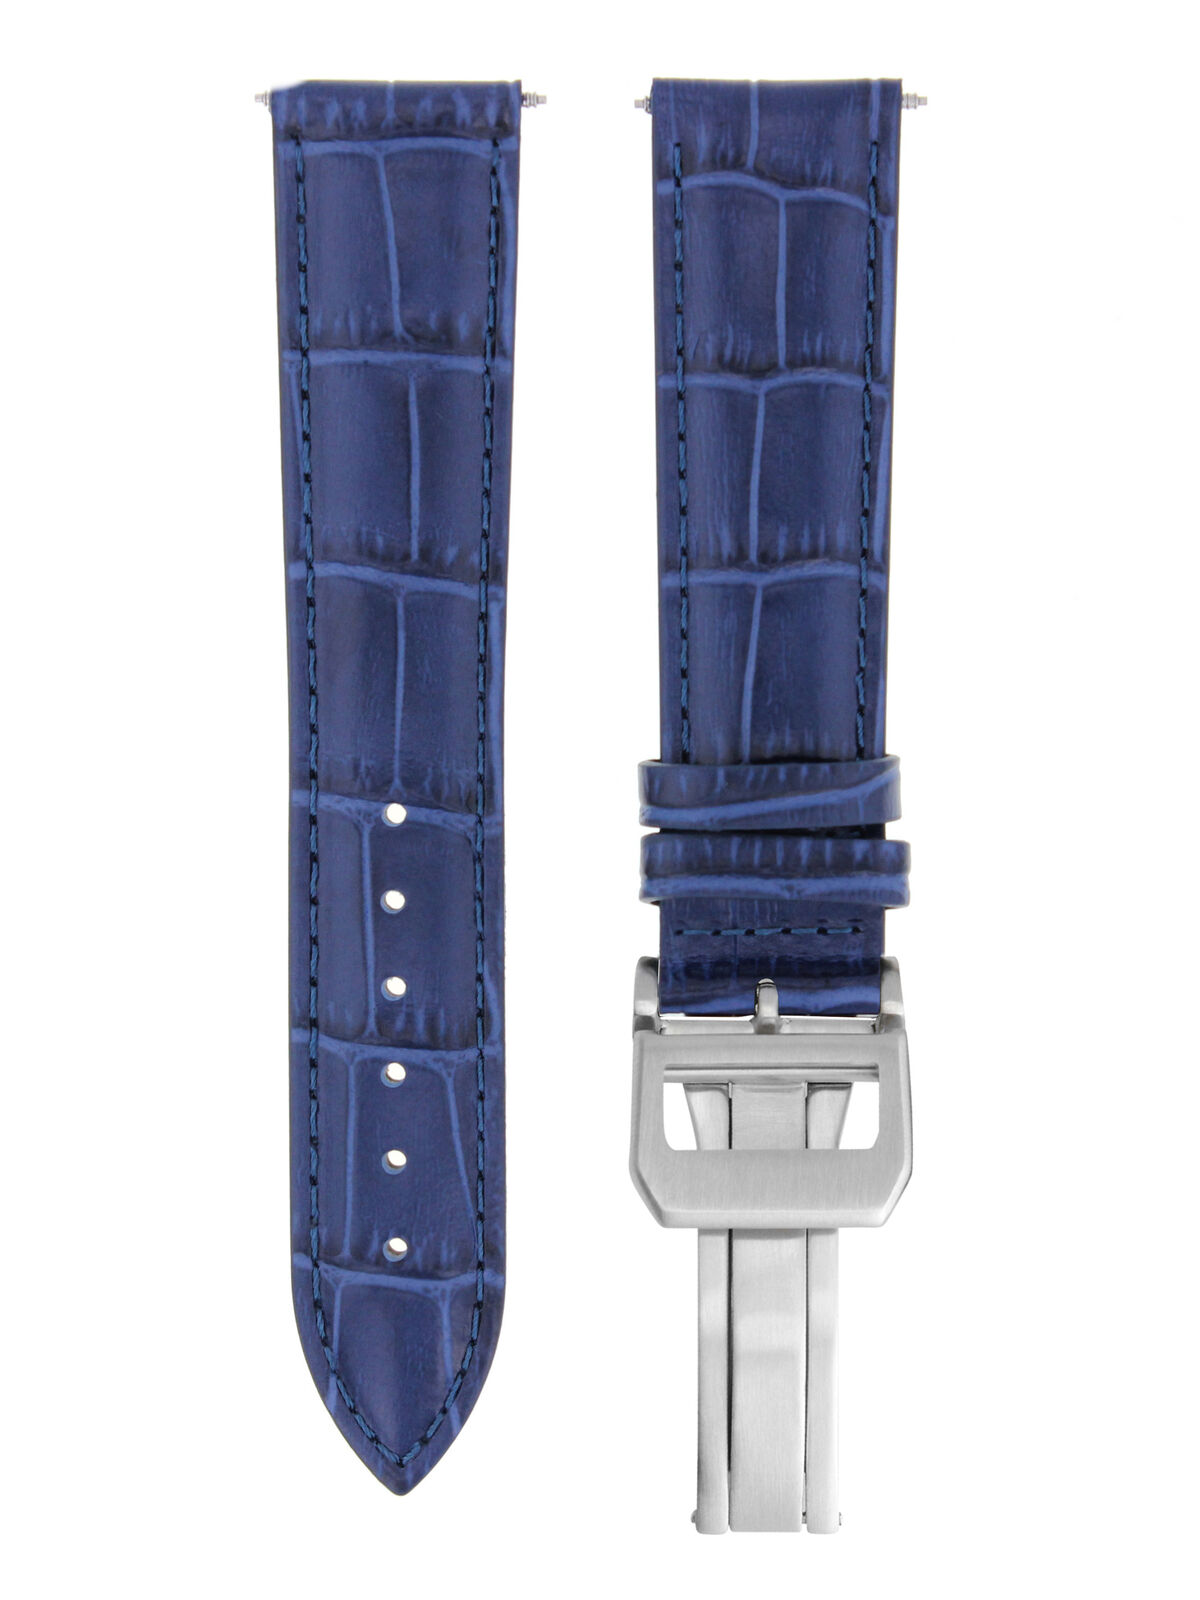 20MM LEATHER WATCH BAND STRAP FOR IWC PILOT PORTUGUESE TOP GUN DEPLOY CLASP BLUE